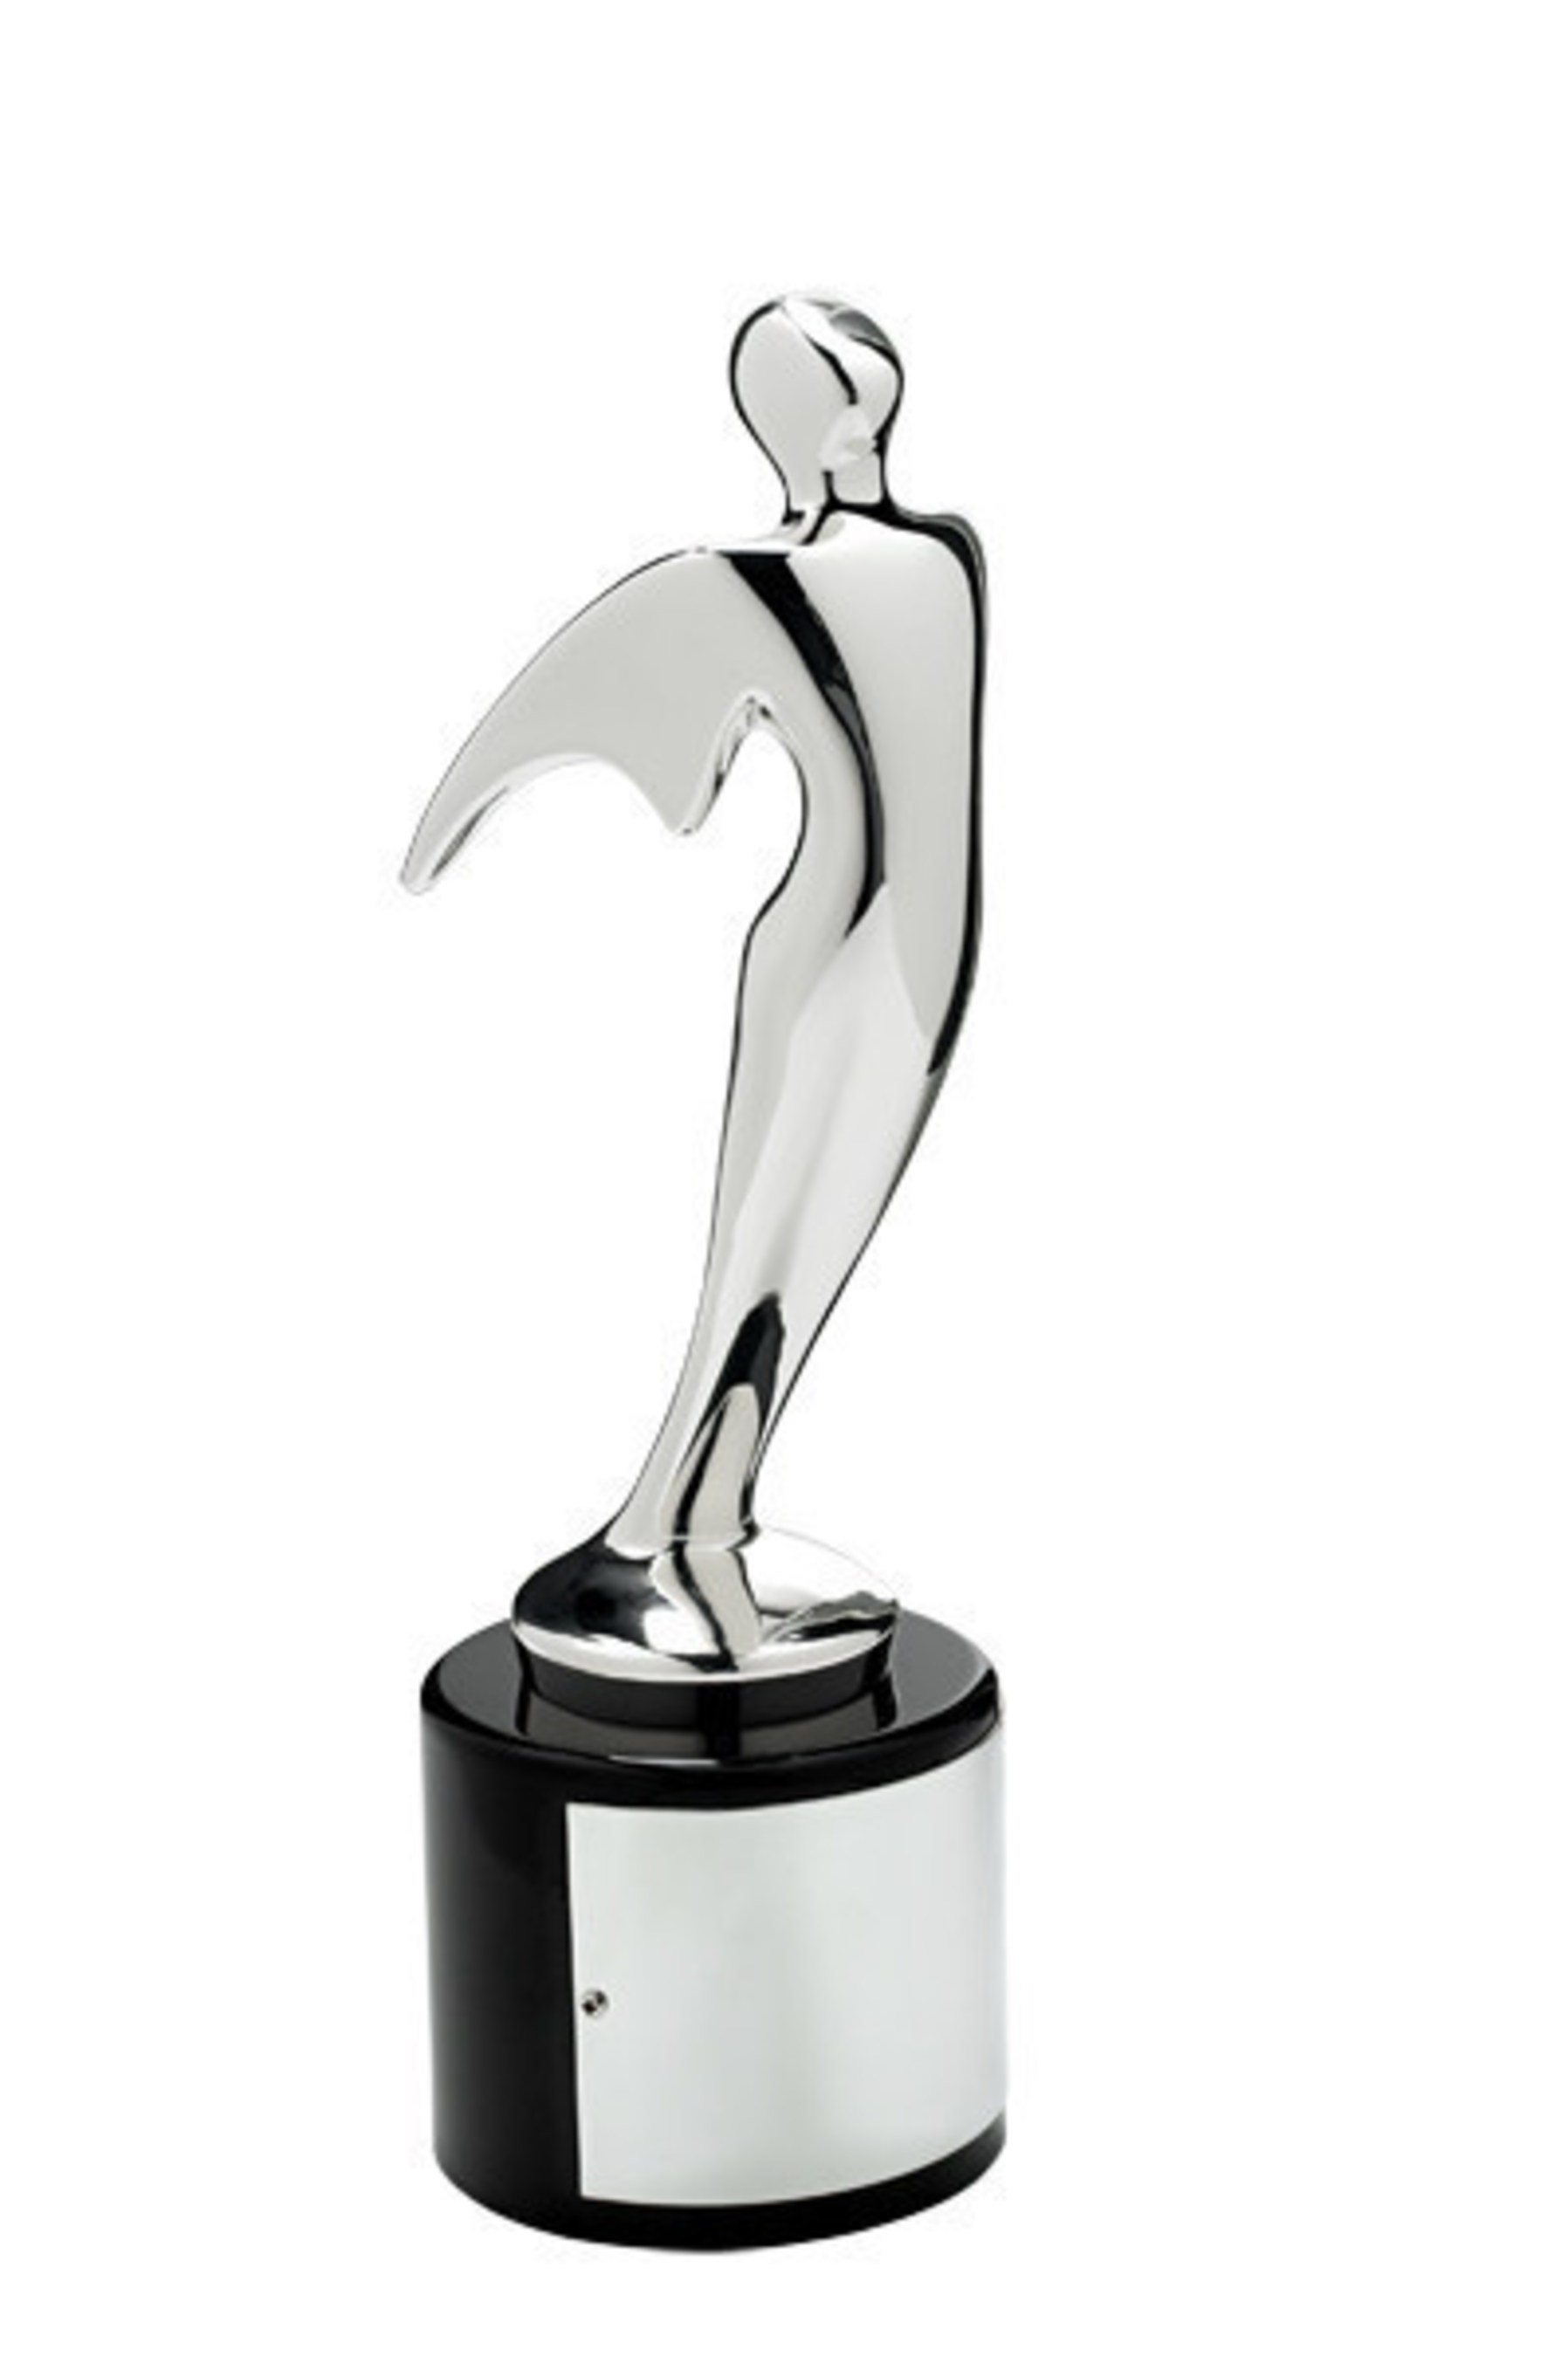 The Ken Garff Automotive Group took home 10 awards from this year's Telly Awards, including two Silver Tellys and eight Bronze Tellys.